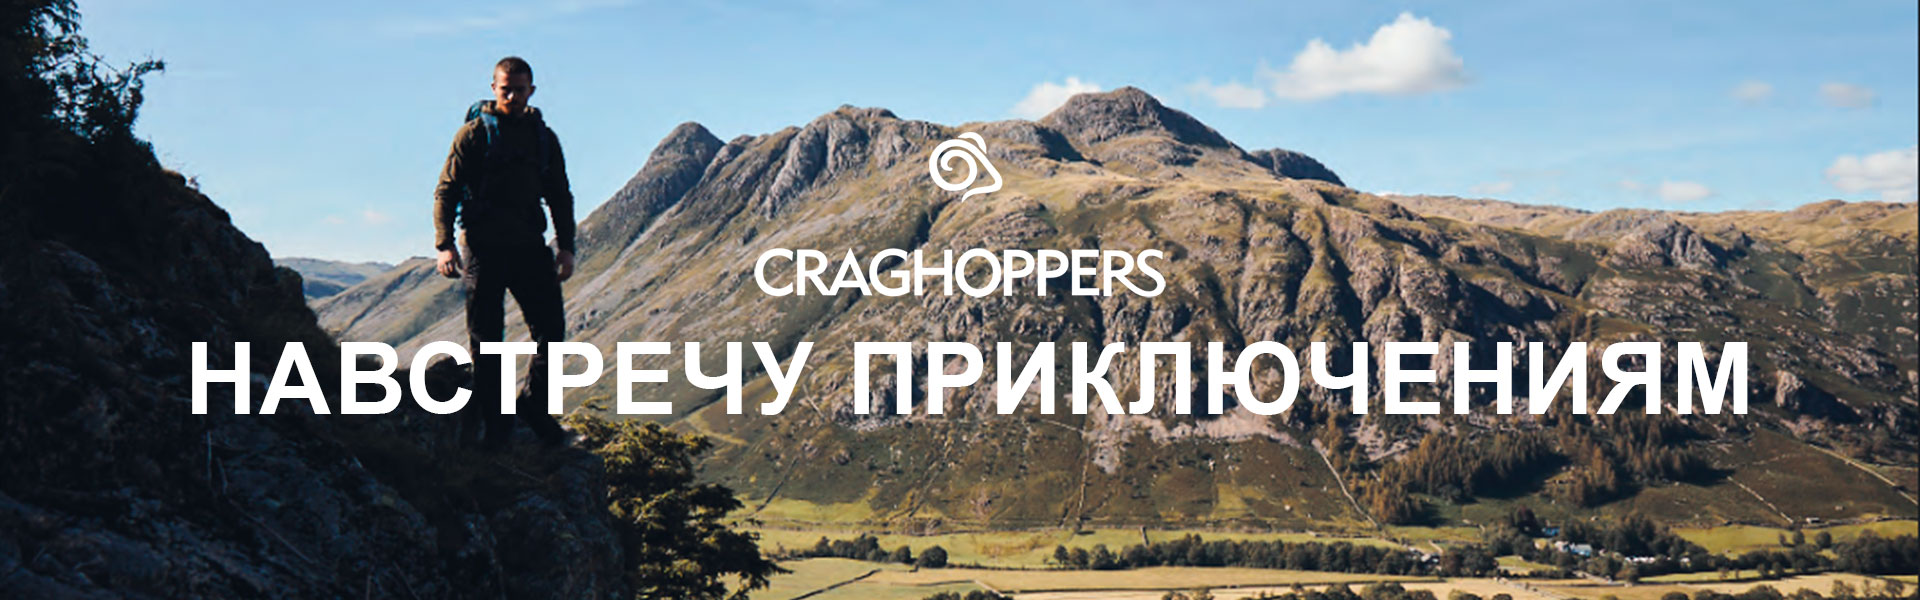 012craghoppers